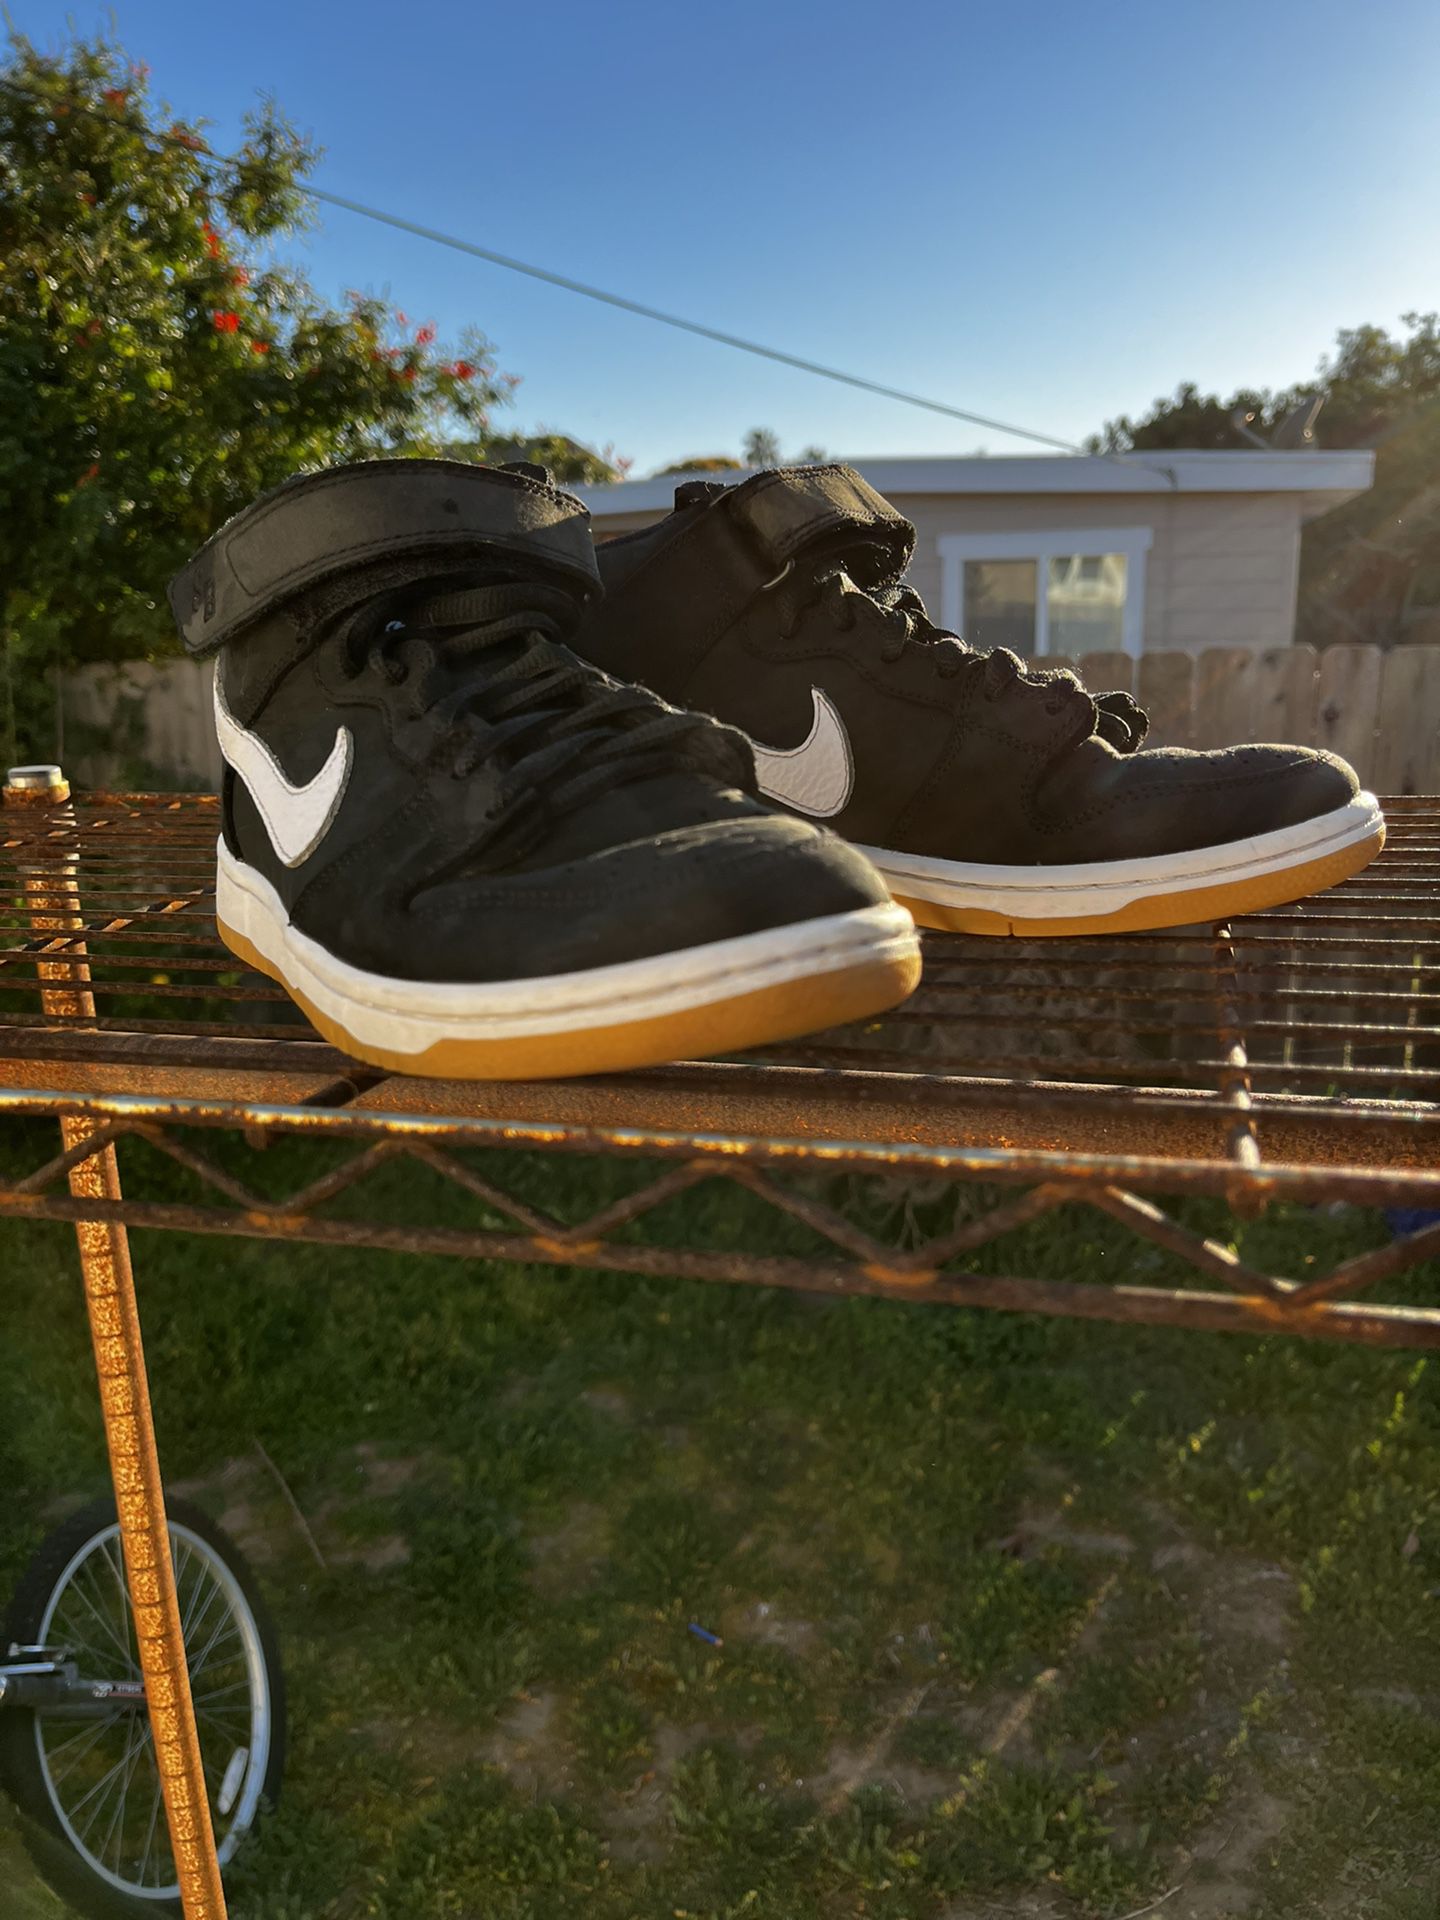 Nike Sb for Sale in - OfferUp